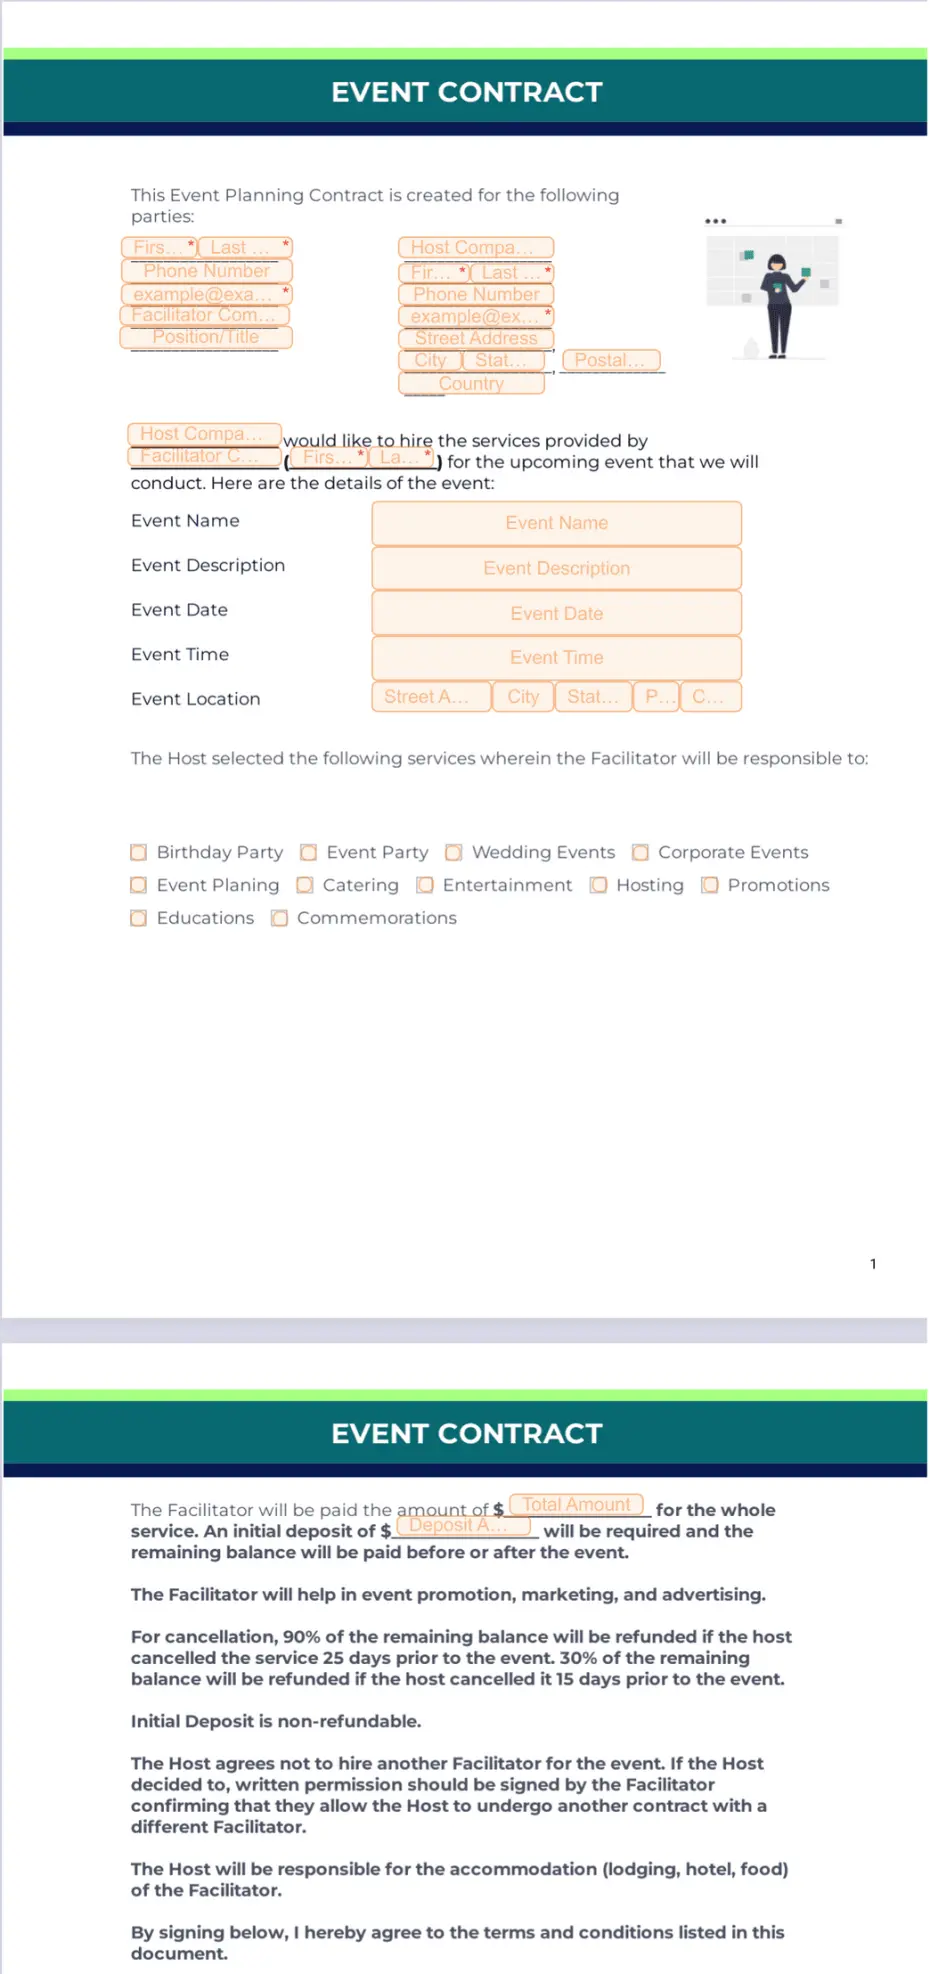 Event Contract